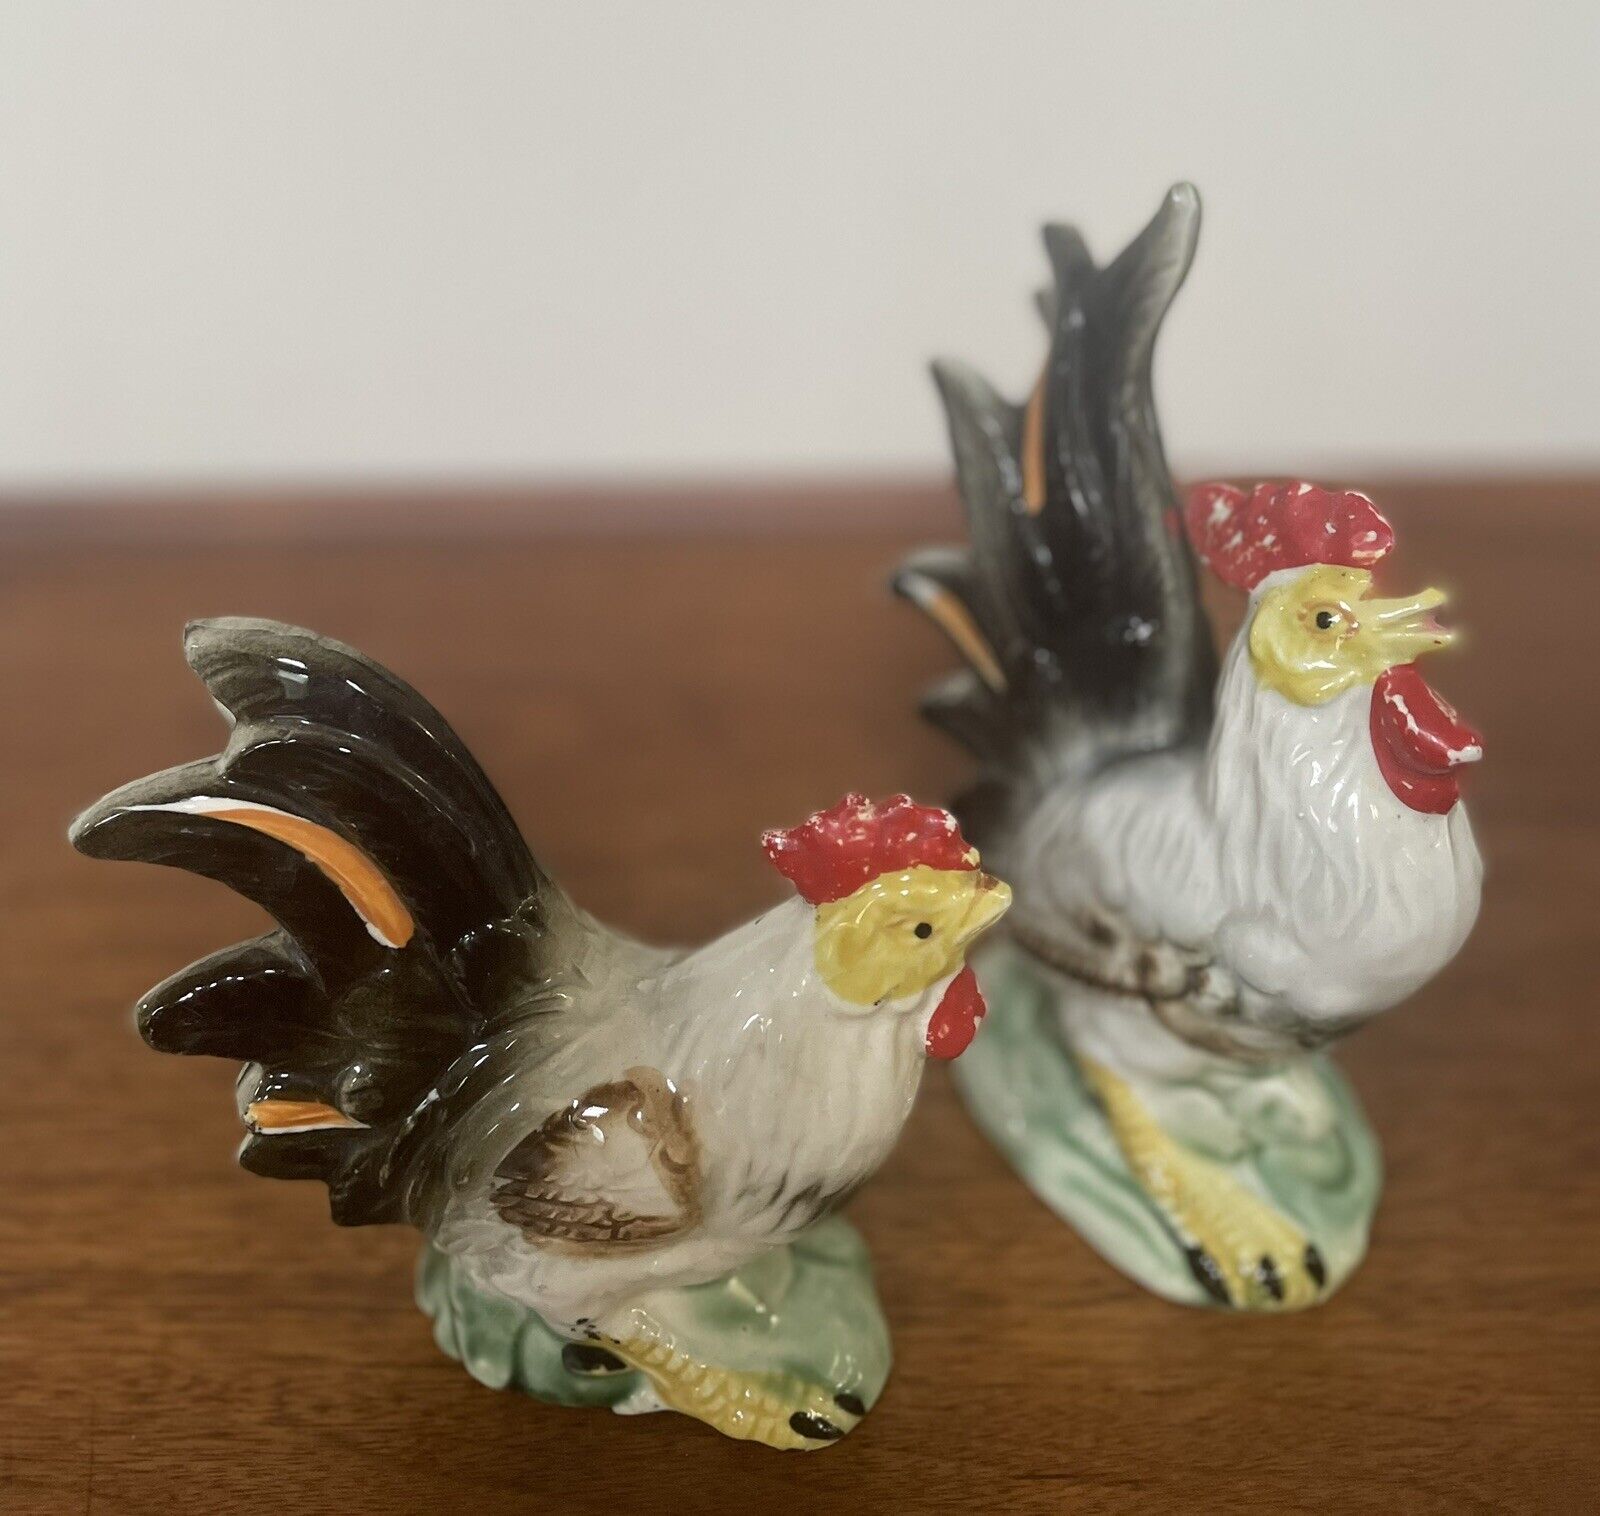 Rooster & Hen Ceramic Figures 5.5”/7.5” Tall-Vintage-Farmhouse-Country Decor